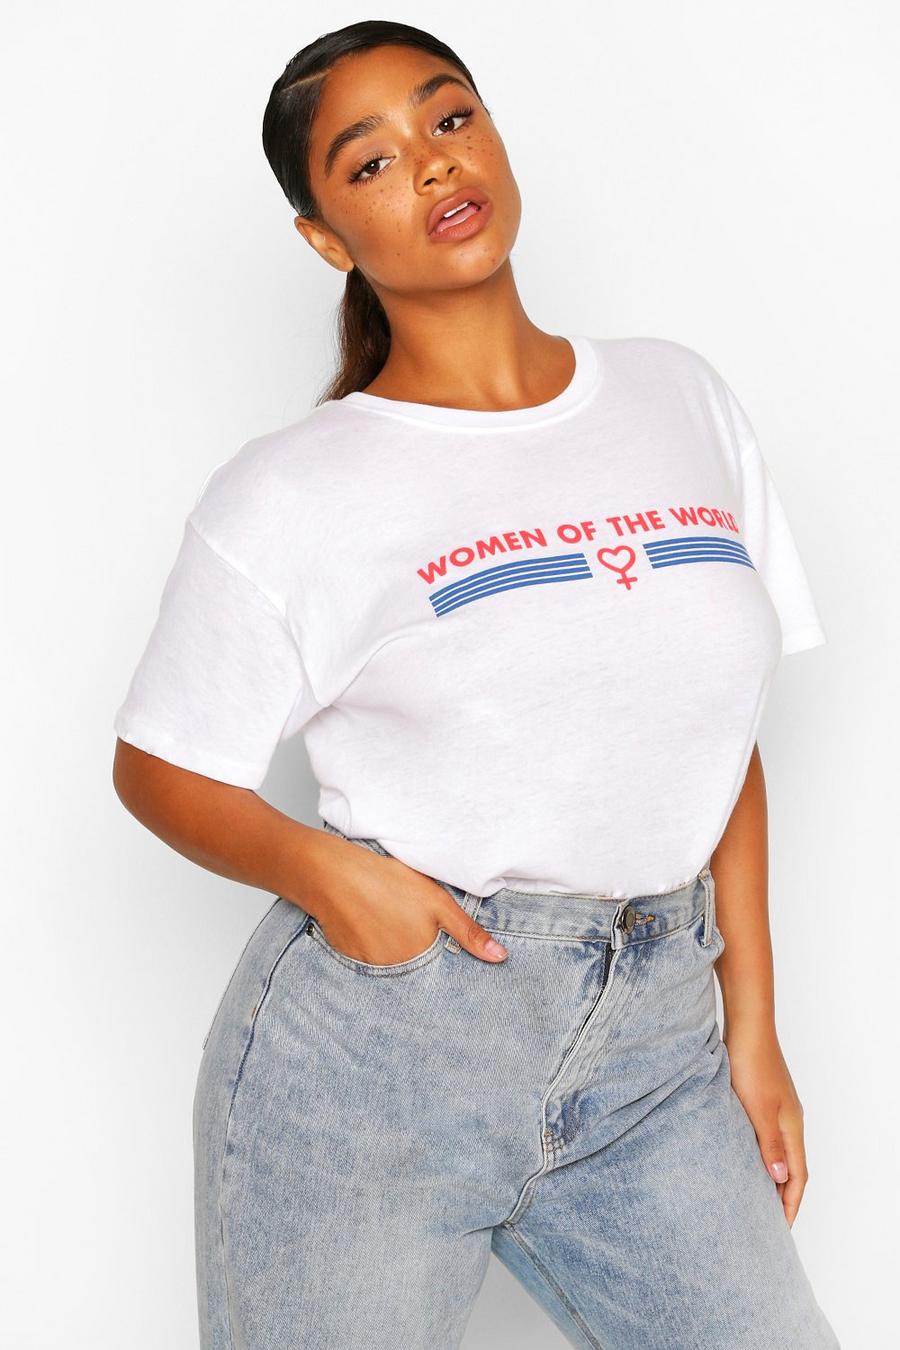 Plus Women Of The World Graphic T-Shirt image number 1